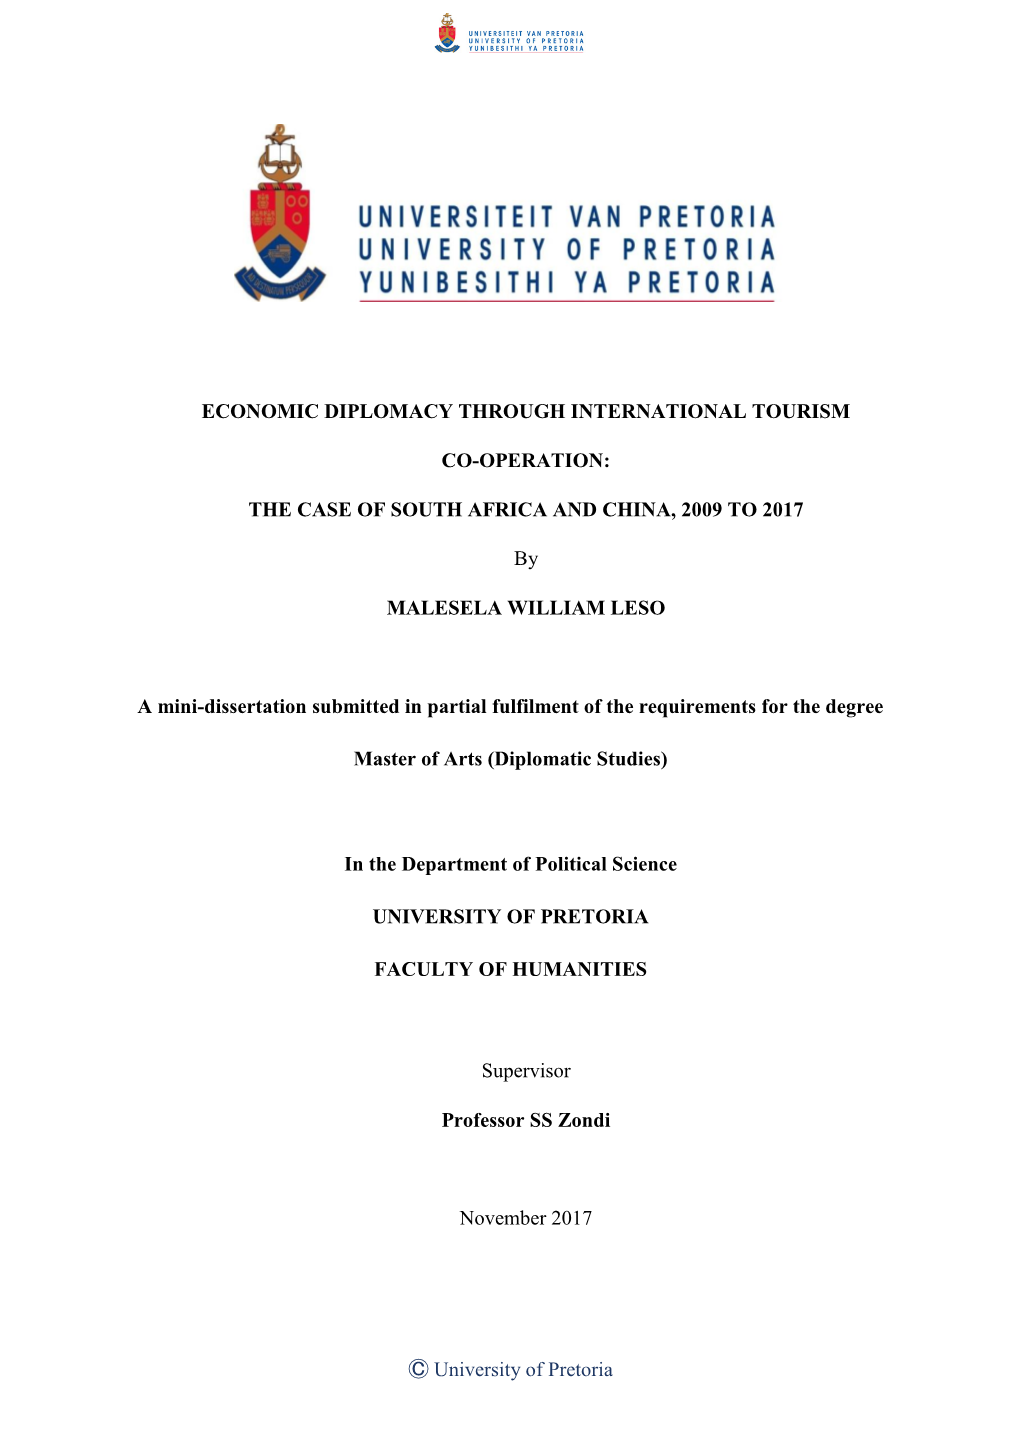 University of Pretoria ECONOMIC DIPLOMACY THROUGH INTERNATIONAL TOURISM CO-OPERATION: the CASE of SOUTH AFRICA and CHINA, 2